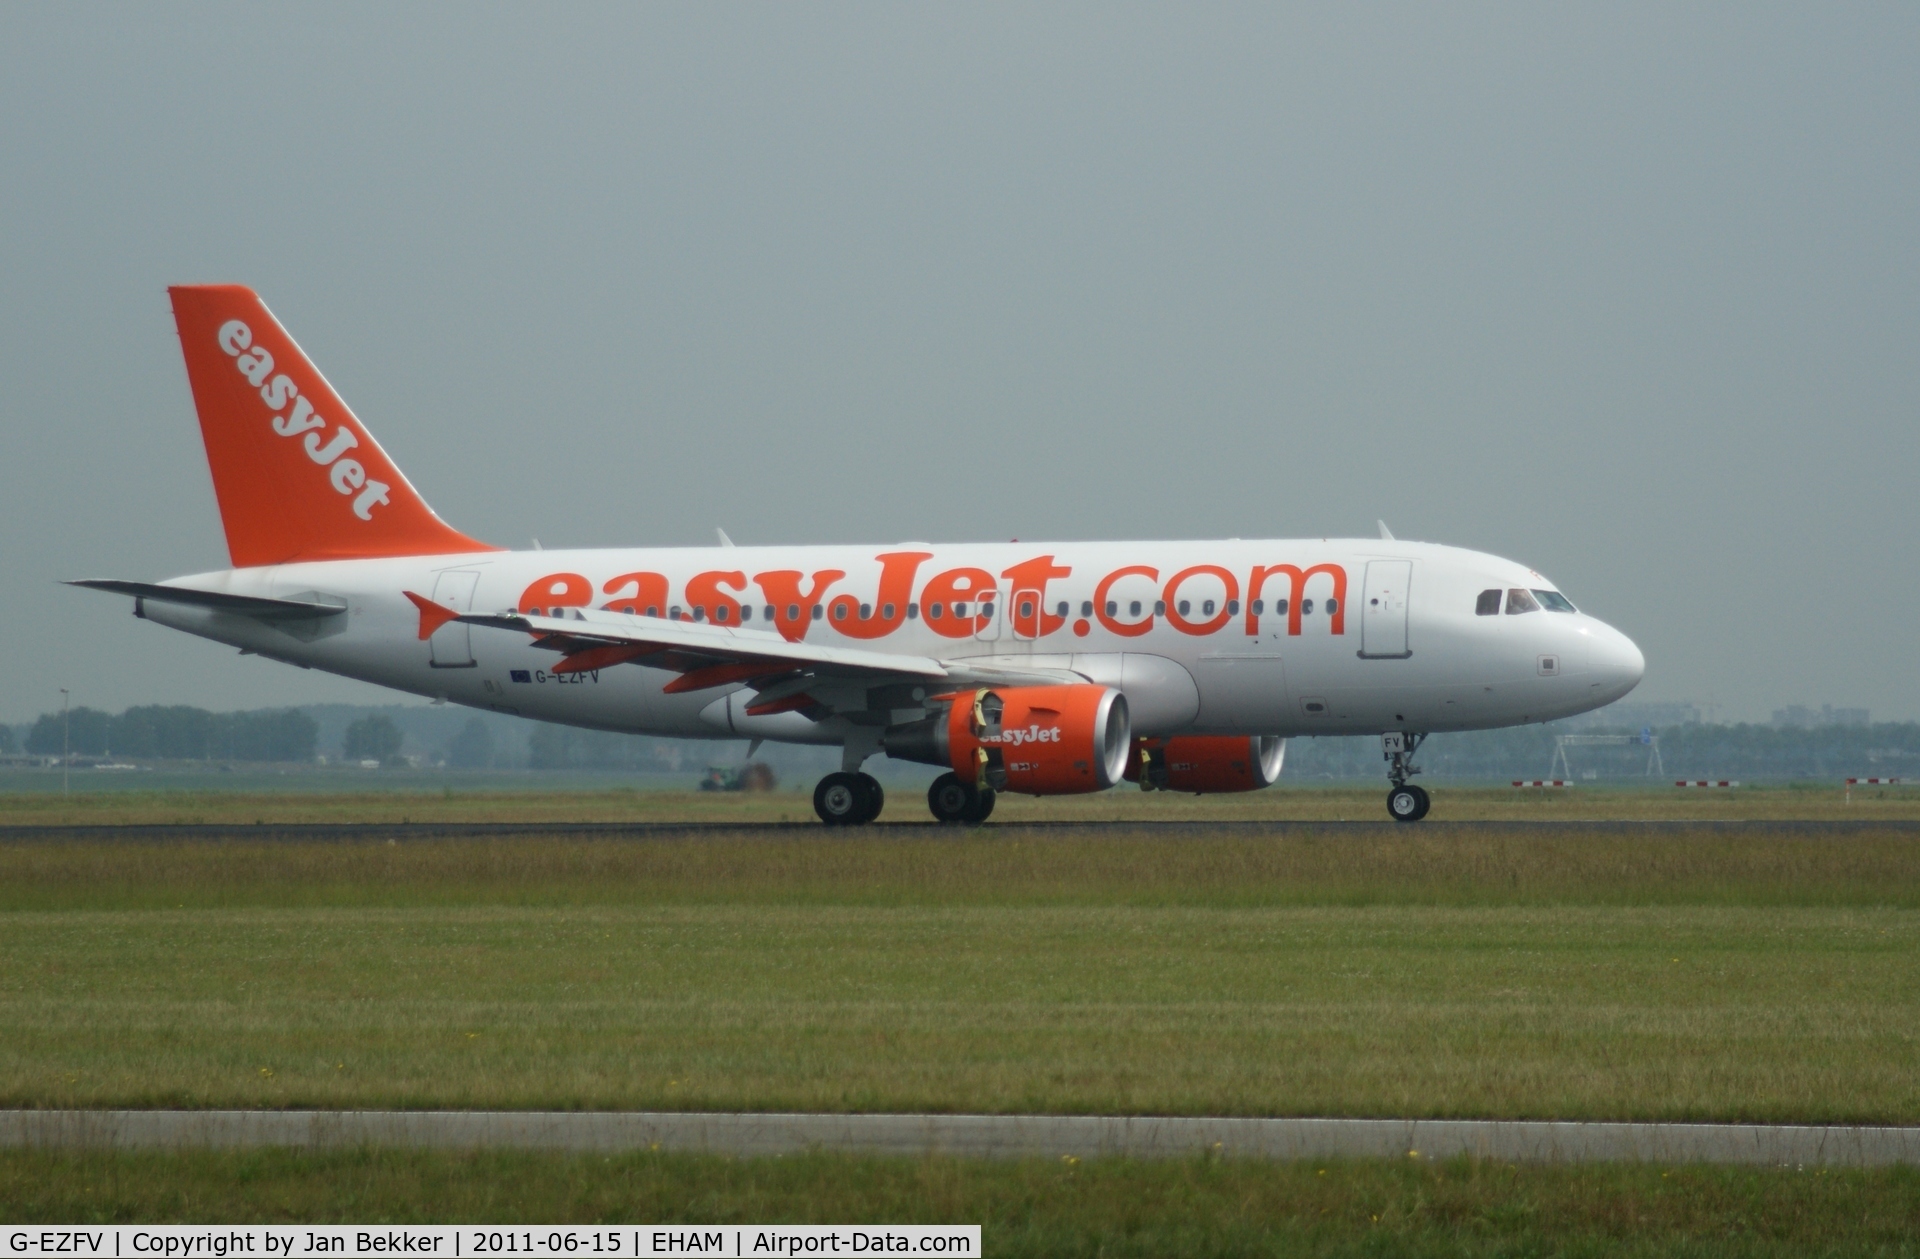 G-EZFV, 2010 Airbus A319-111 C/N 4327, Just after touchdown on the Polderbaan at Schiphol